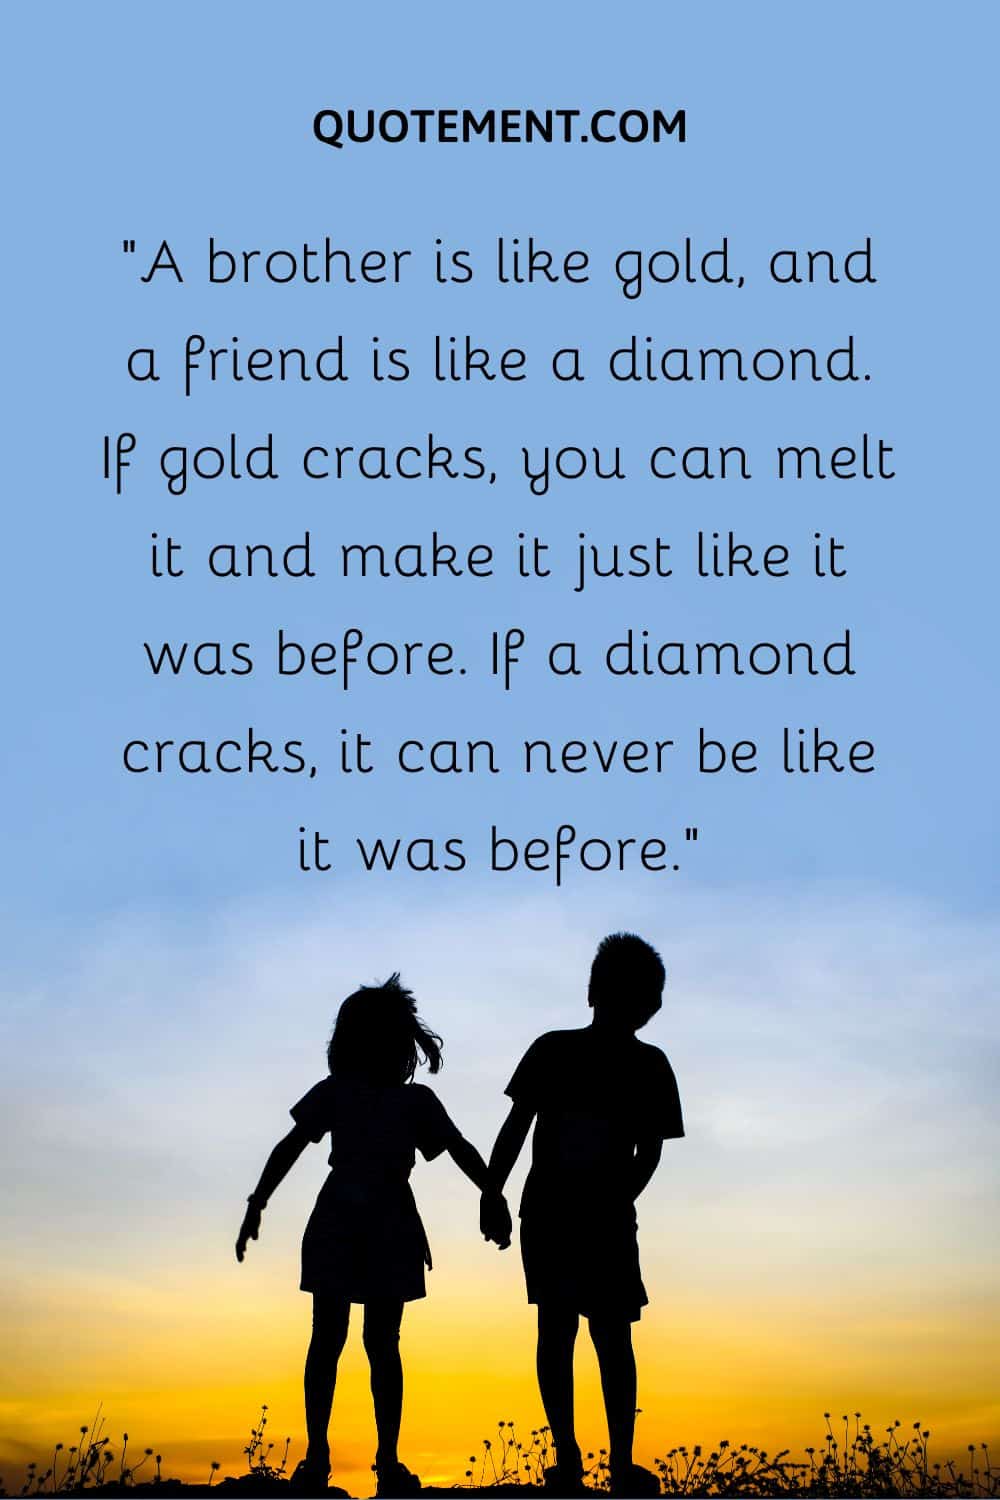 “A brother is like gold, and a friend is like a diamond. If gold cracks, you can melt it and make it just like it was before. If a diamond cracks, it can never be like it was before.”